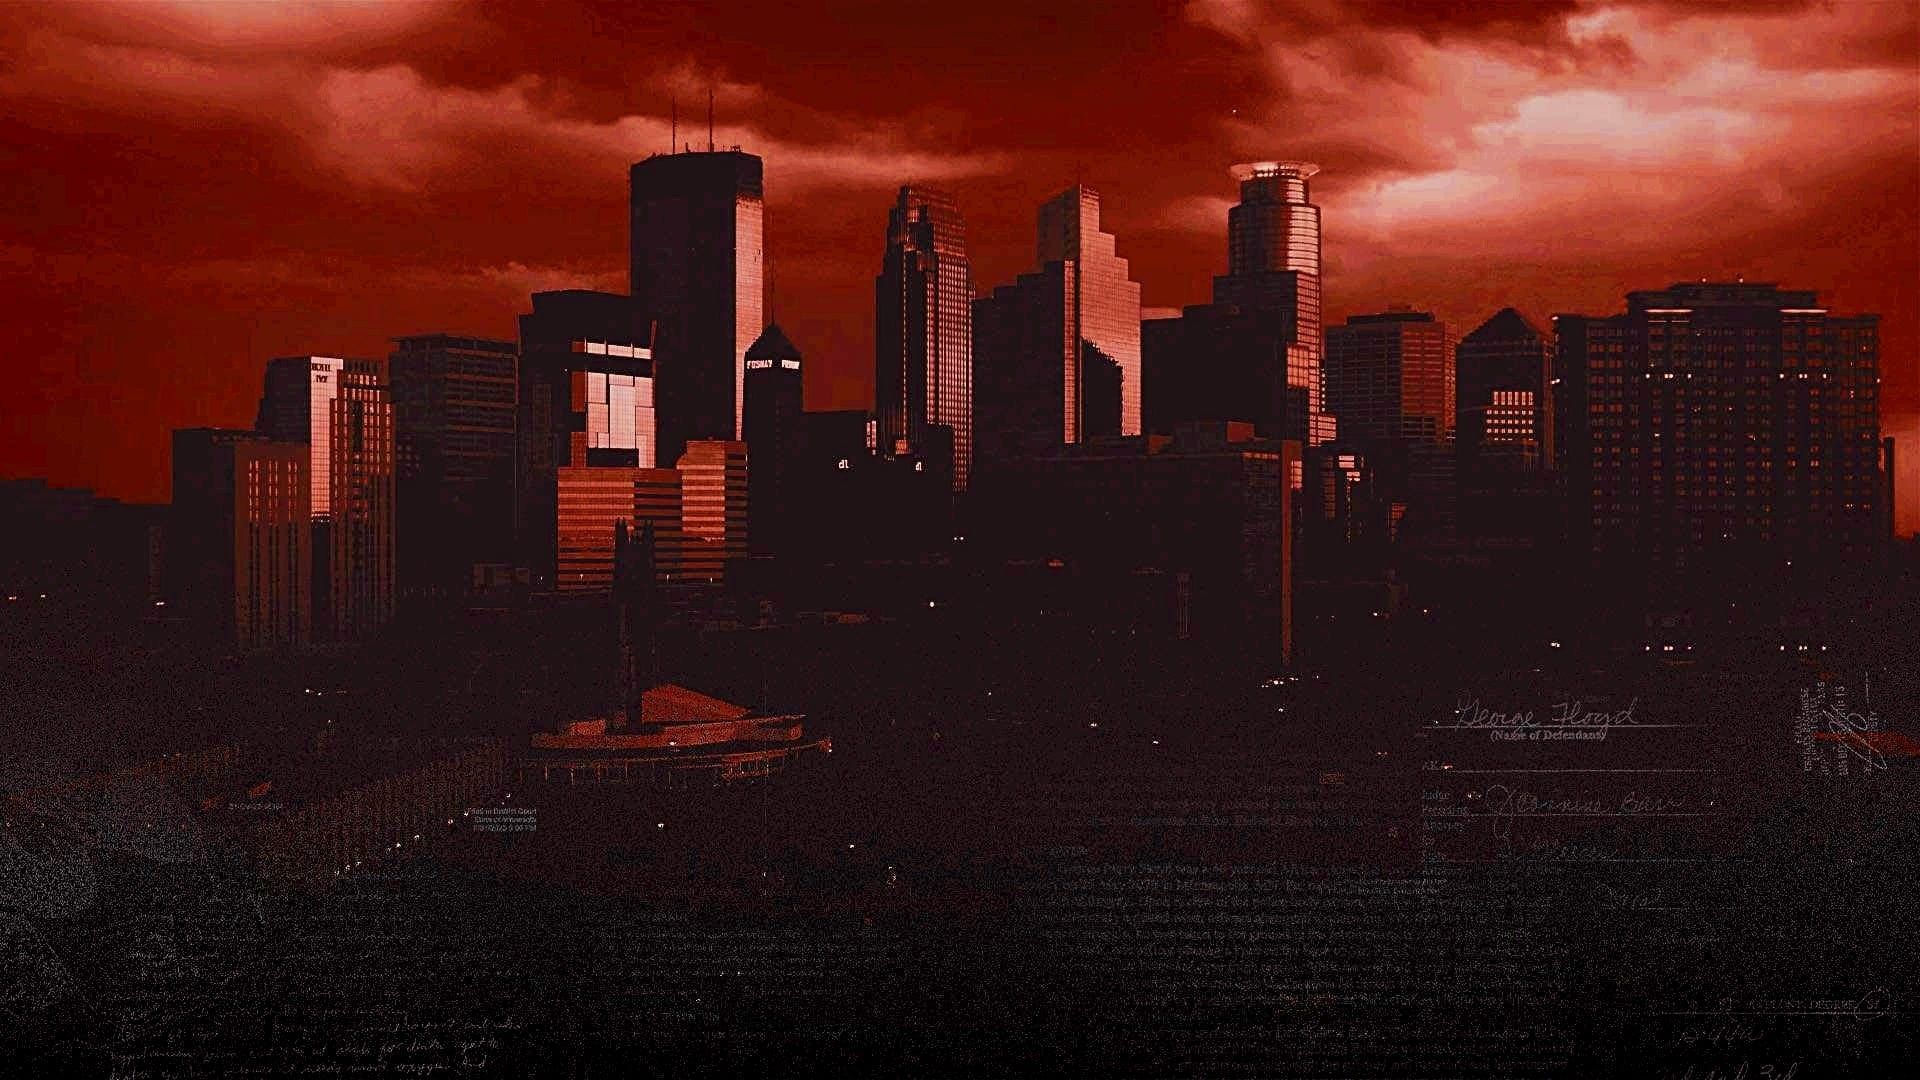 The Fall of Minneapolis background